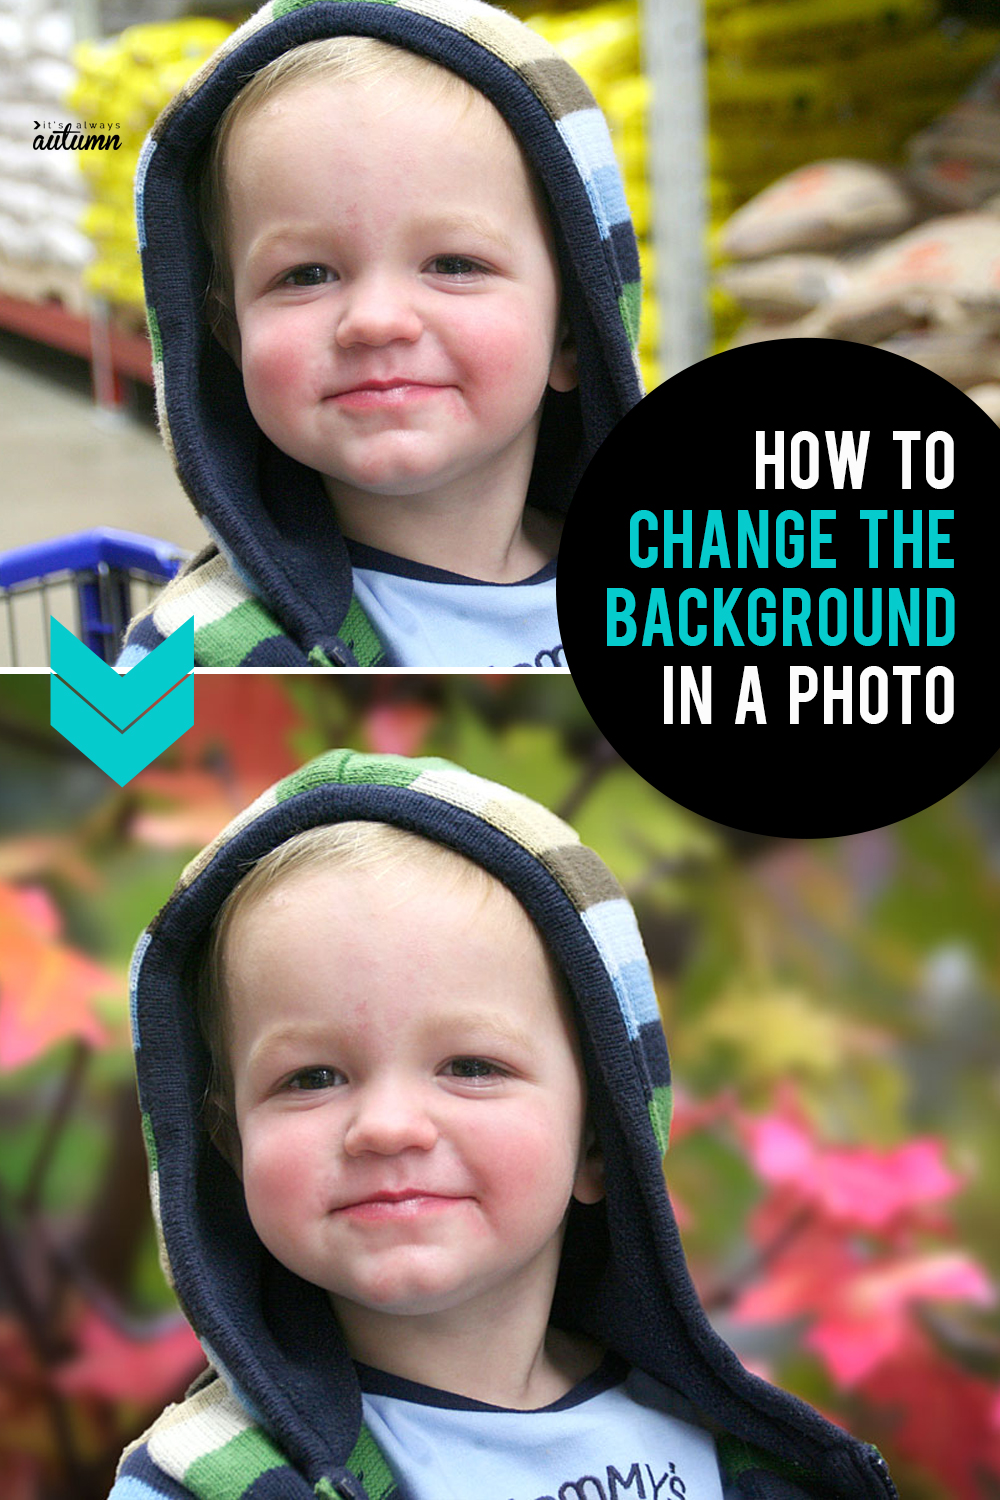 Learn how easy it is to change the background in a photo with just a few clicks!